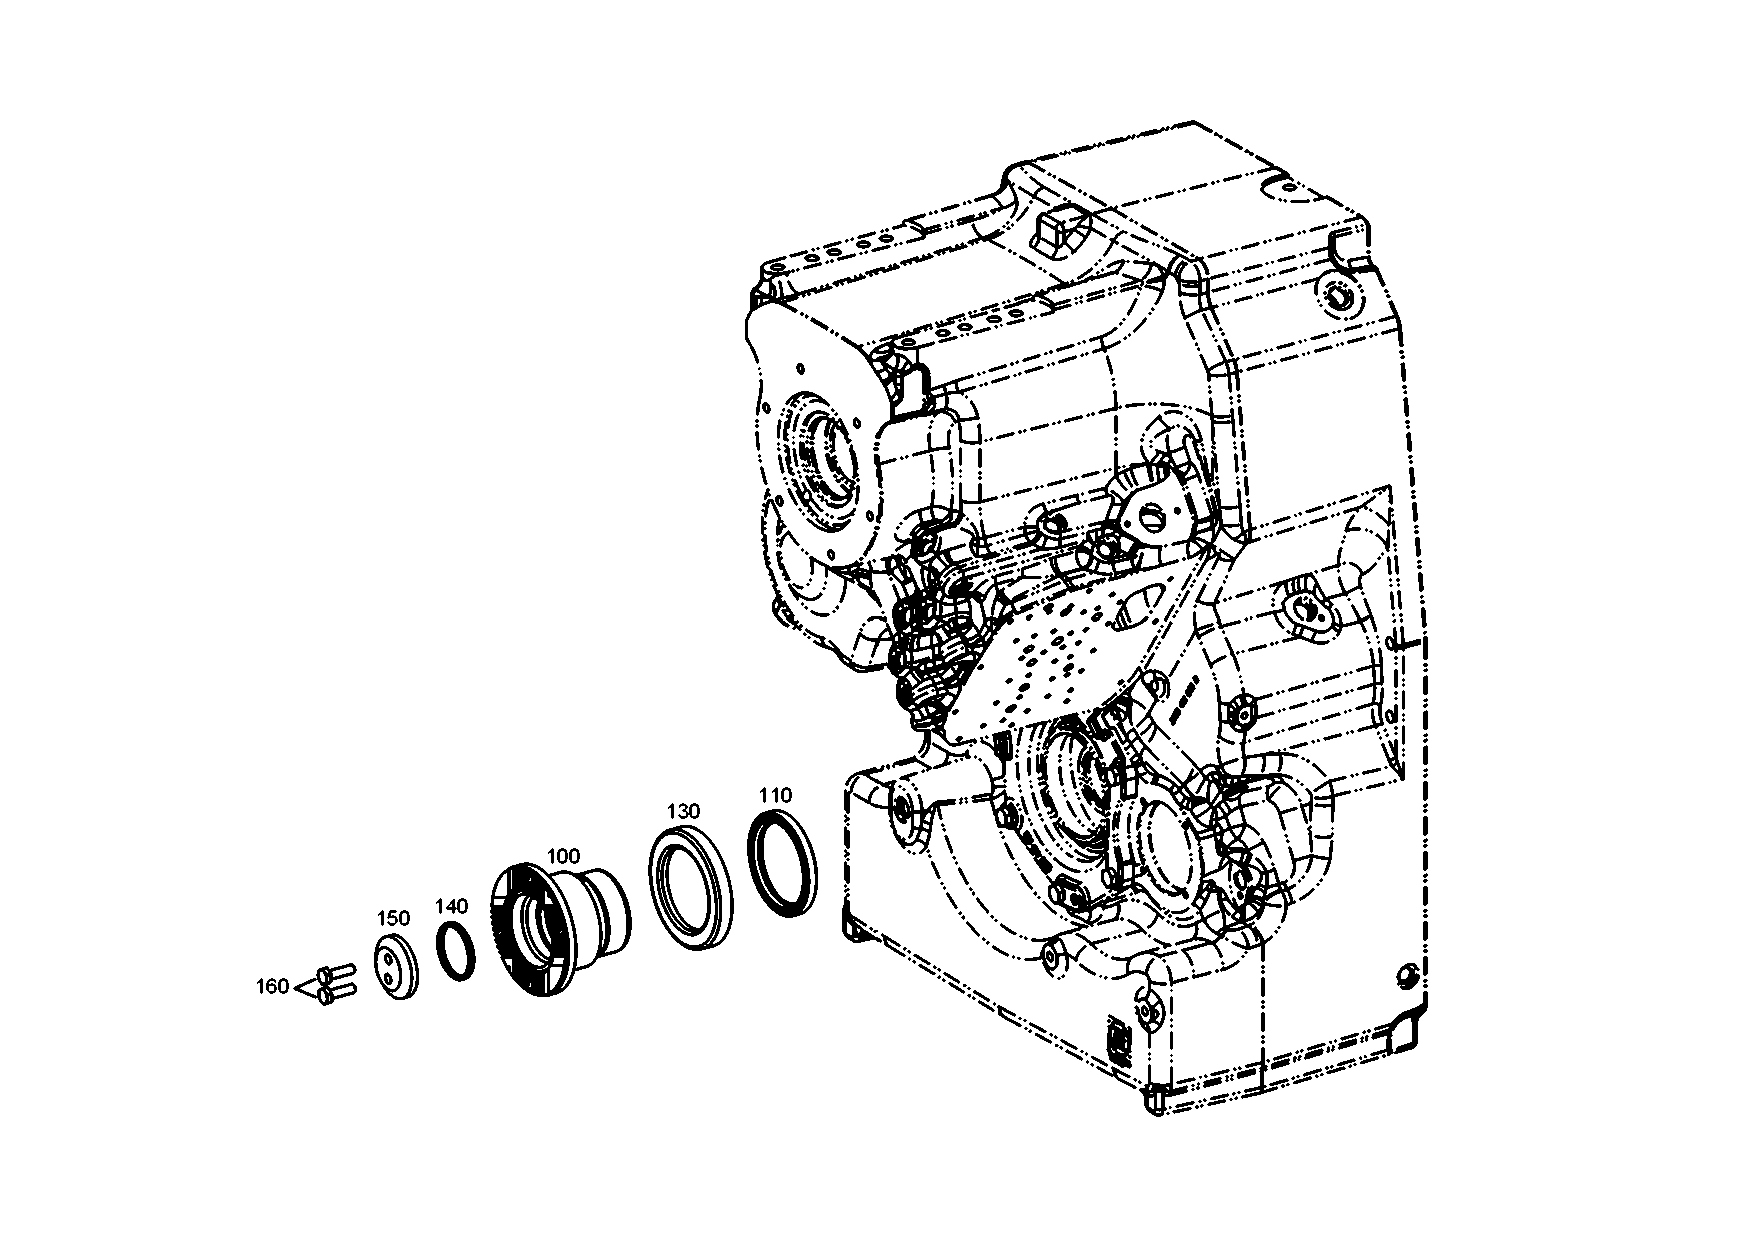 drawing for MOXY TRUCKS AS 352010 - SHAFT SEAL